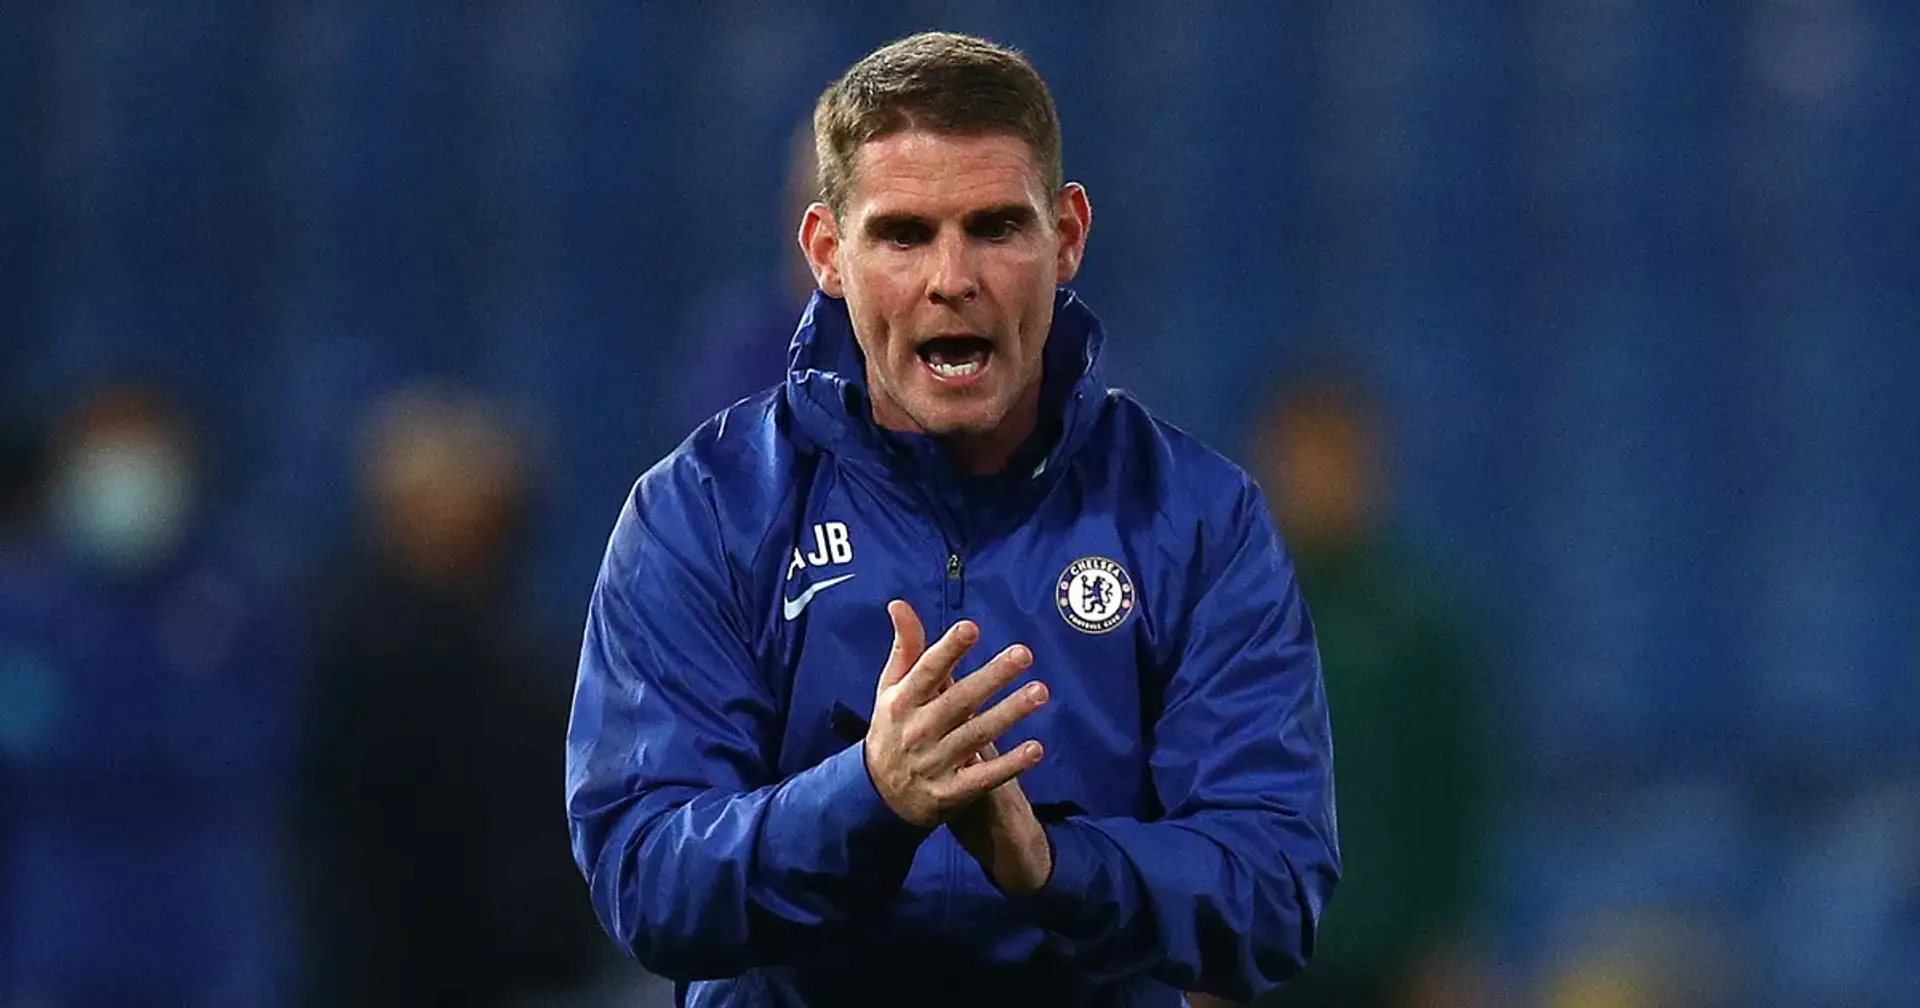 'Continue to hear awesome things about him': fans react as Anthony Barry, coach responsible for backline overhaul, set to stay at Chelsea